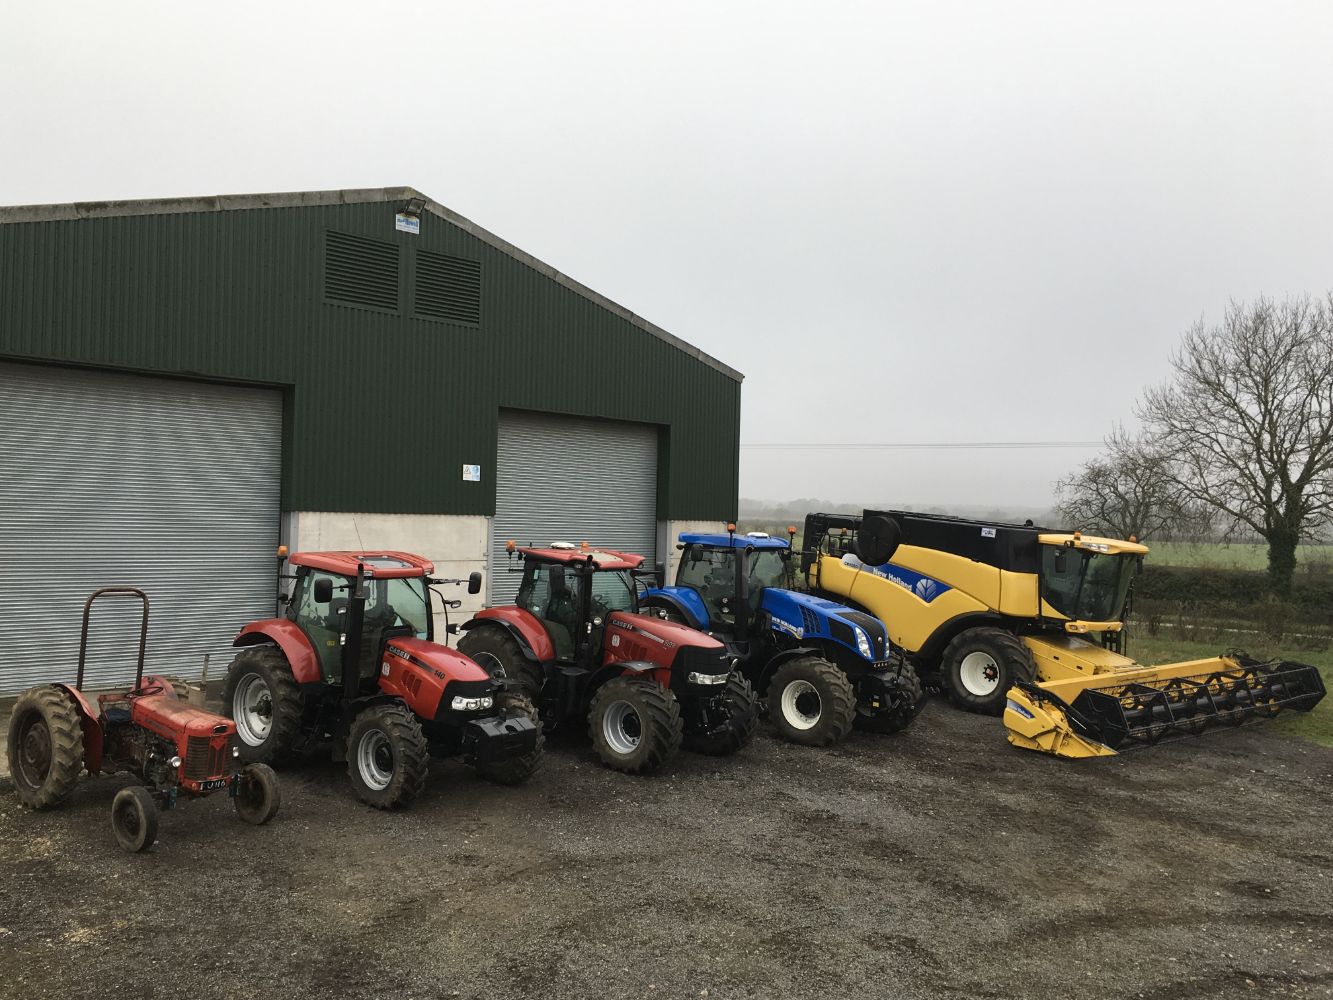 Sale By Auction Of Modern Farm Machinery